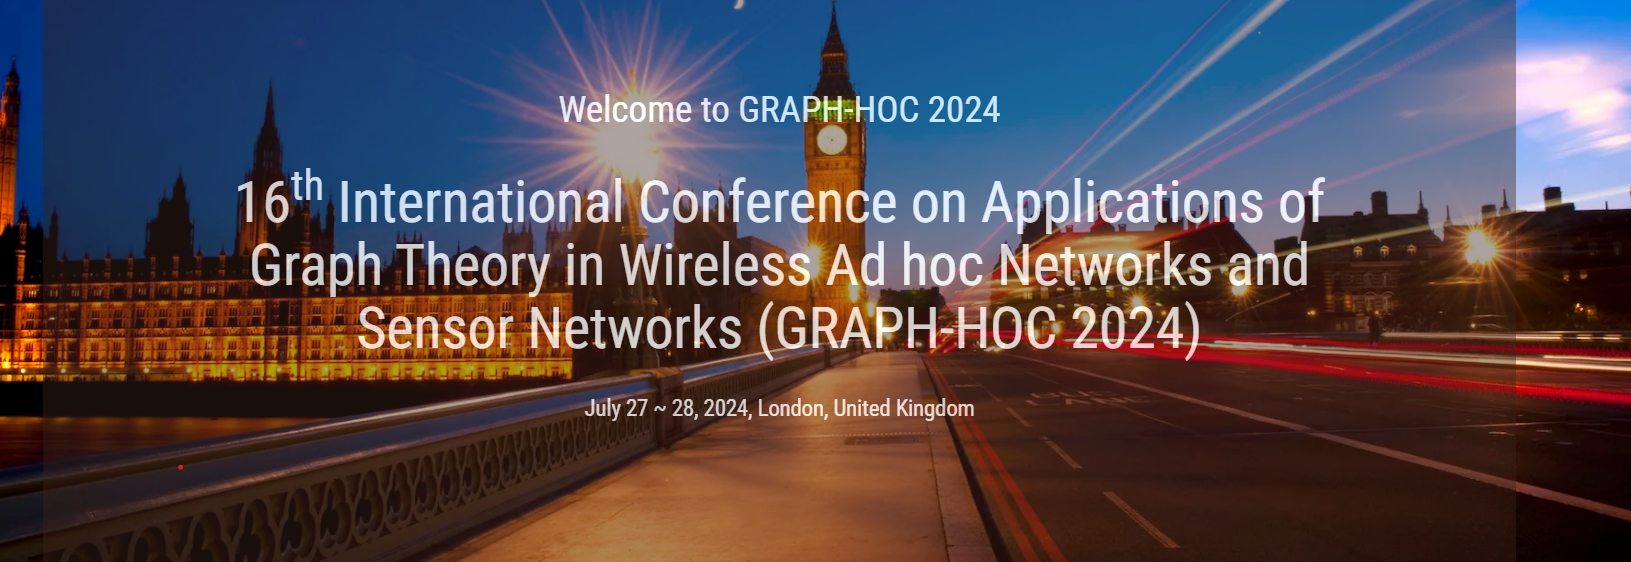 13th International Conference of Networks and Communications (NECO 2024), Online Event